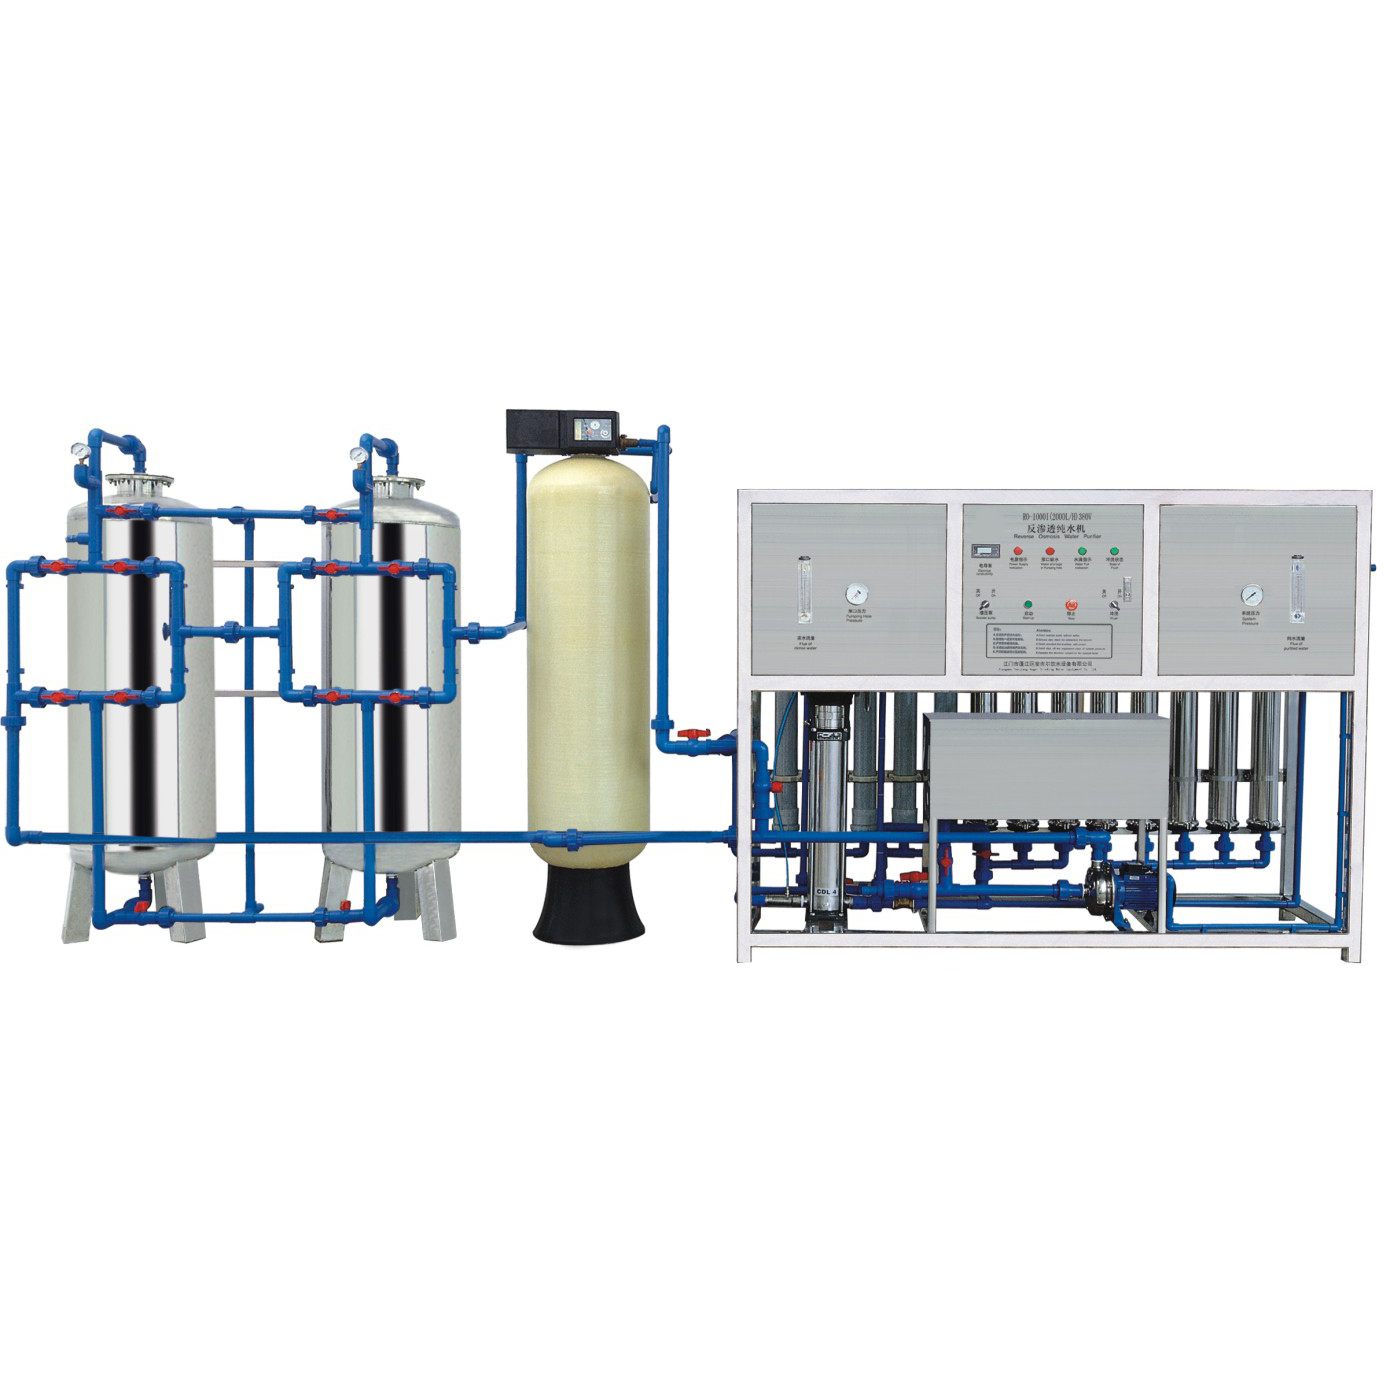 RO Water Purification Machine 2000 liter purified water outlet flow 